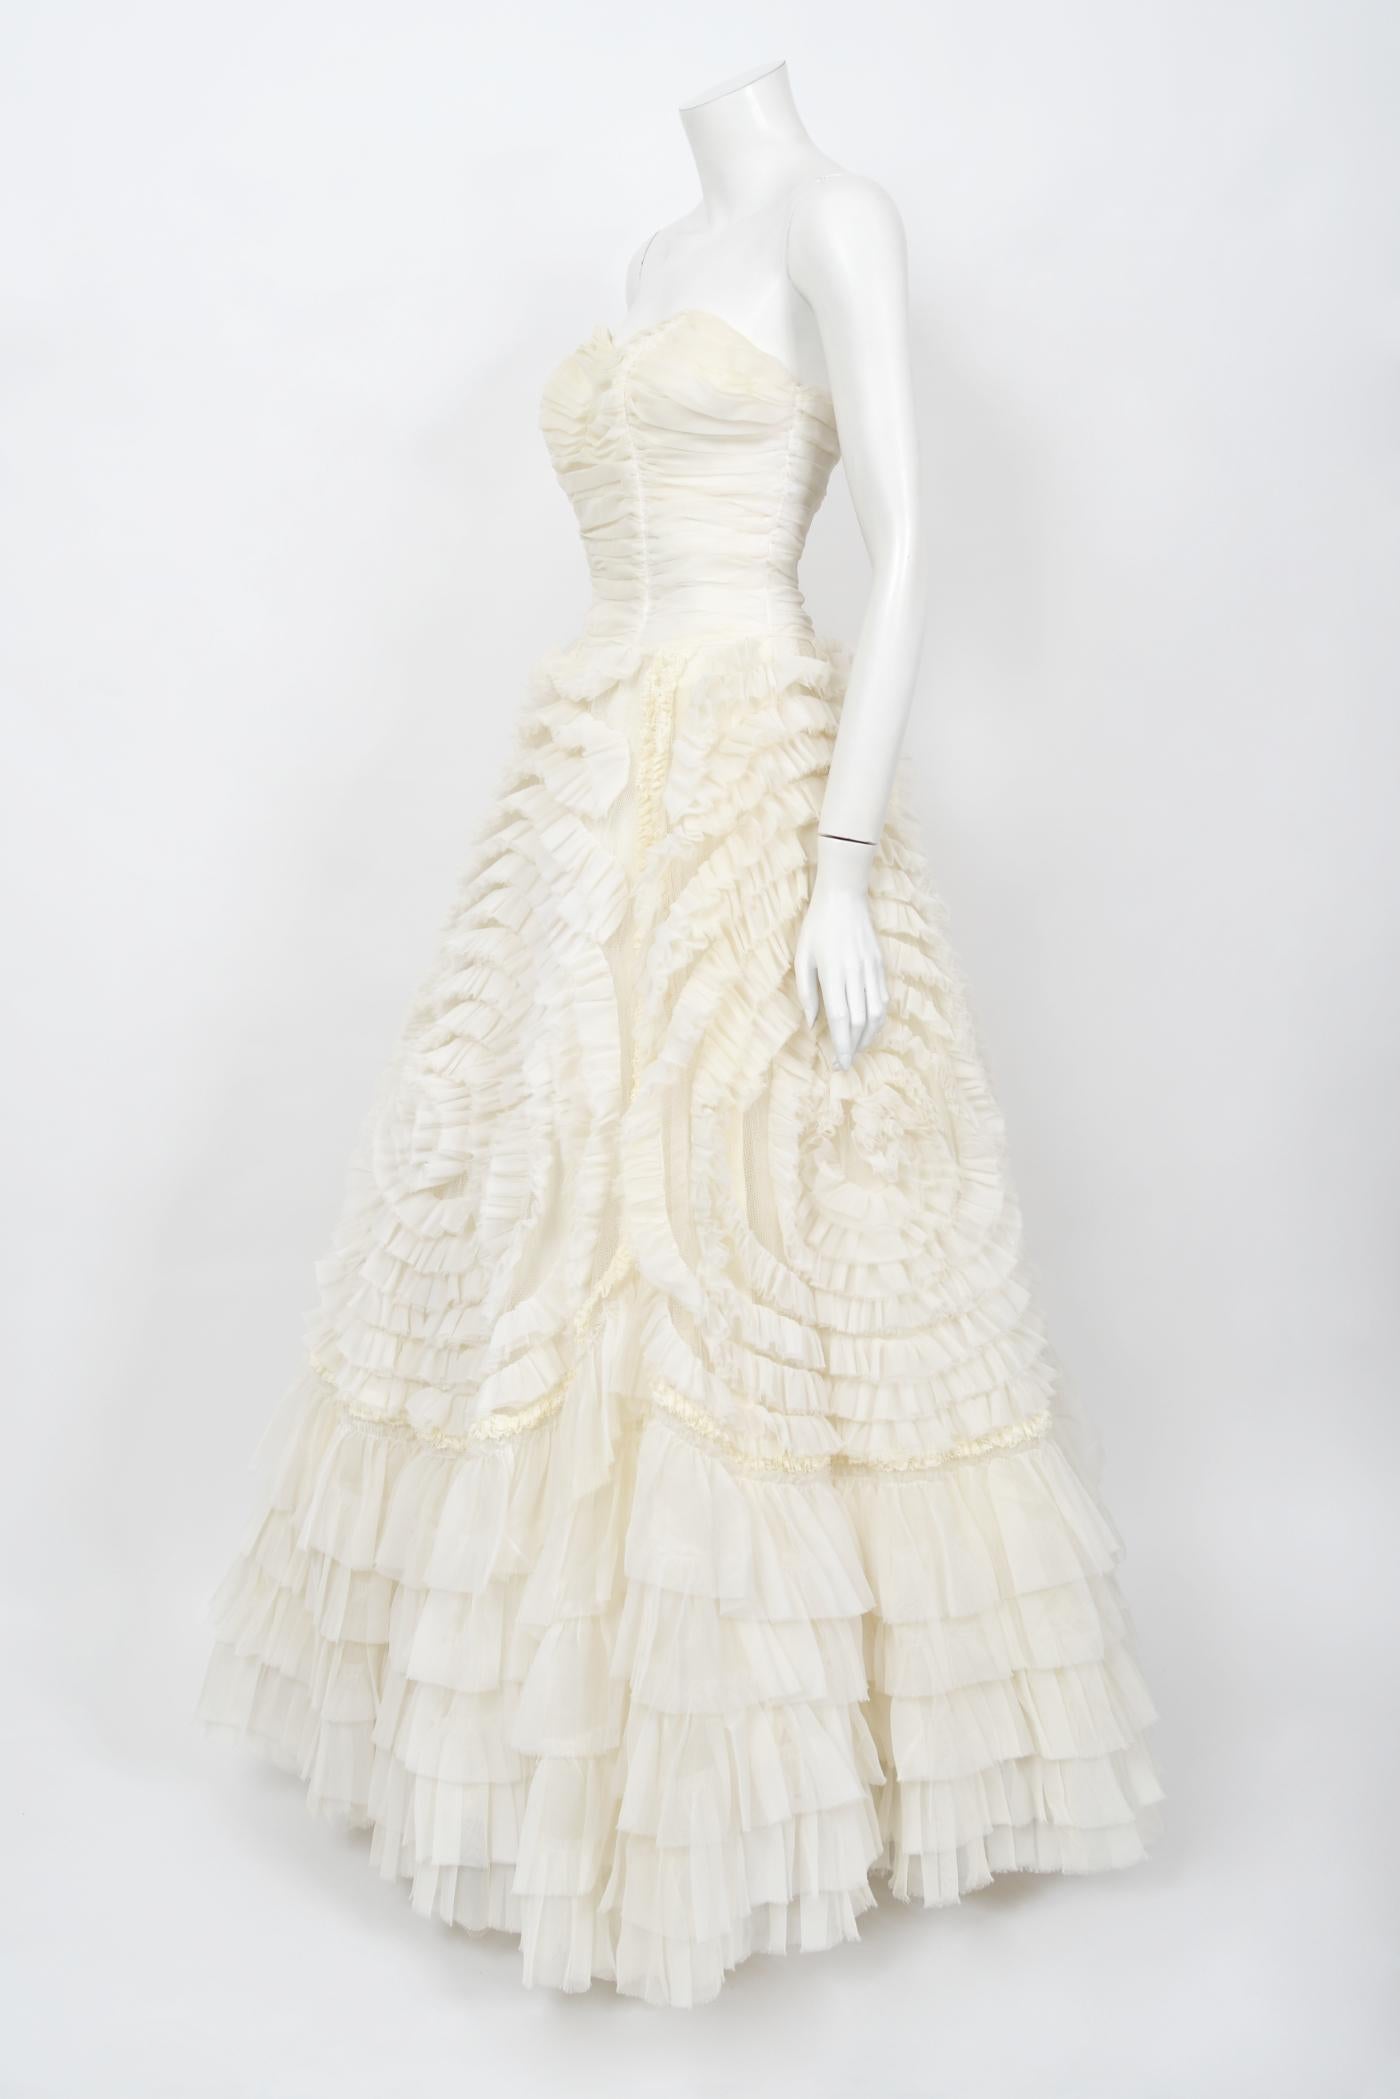 Beige Vintage 1950's Ivory Chiffon Strapless Tiered Ruffle Full-Length Bridal Gown 